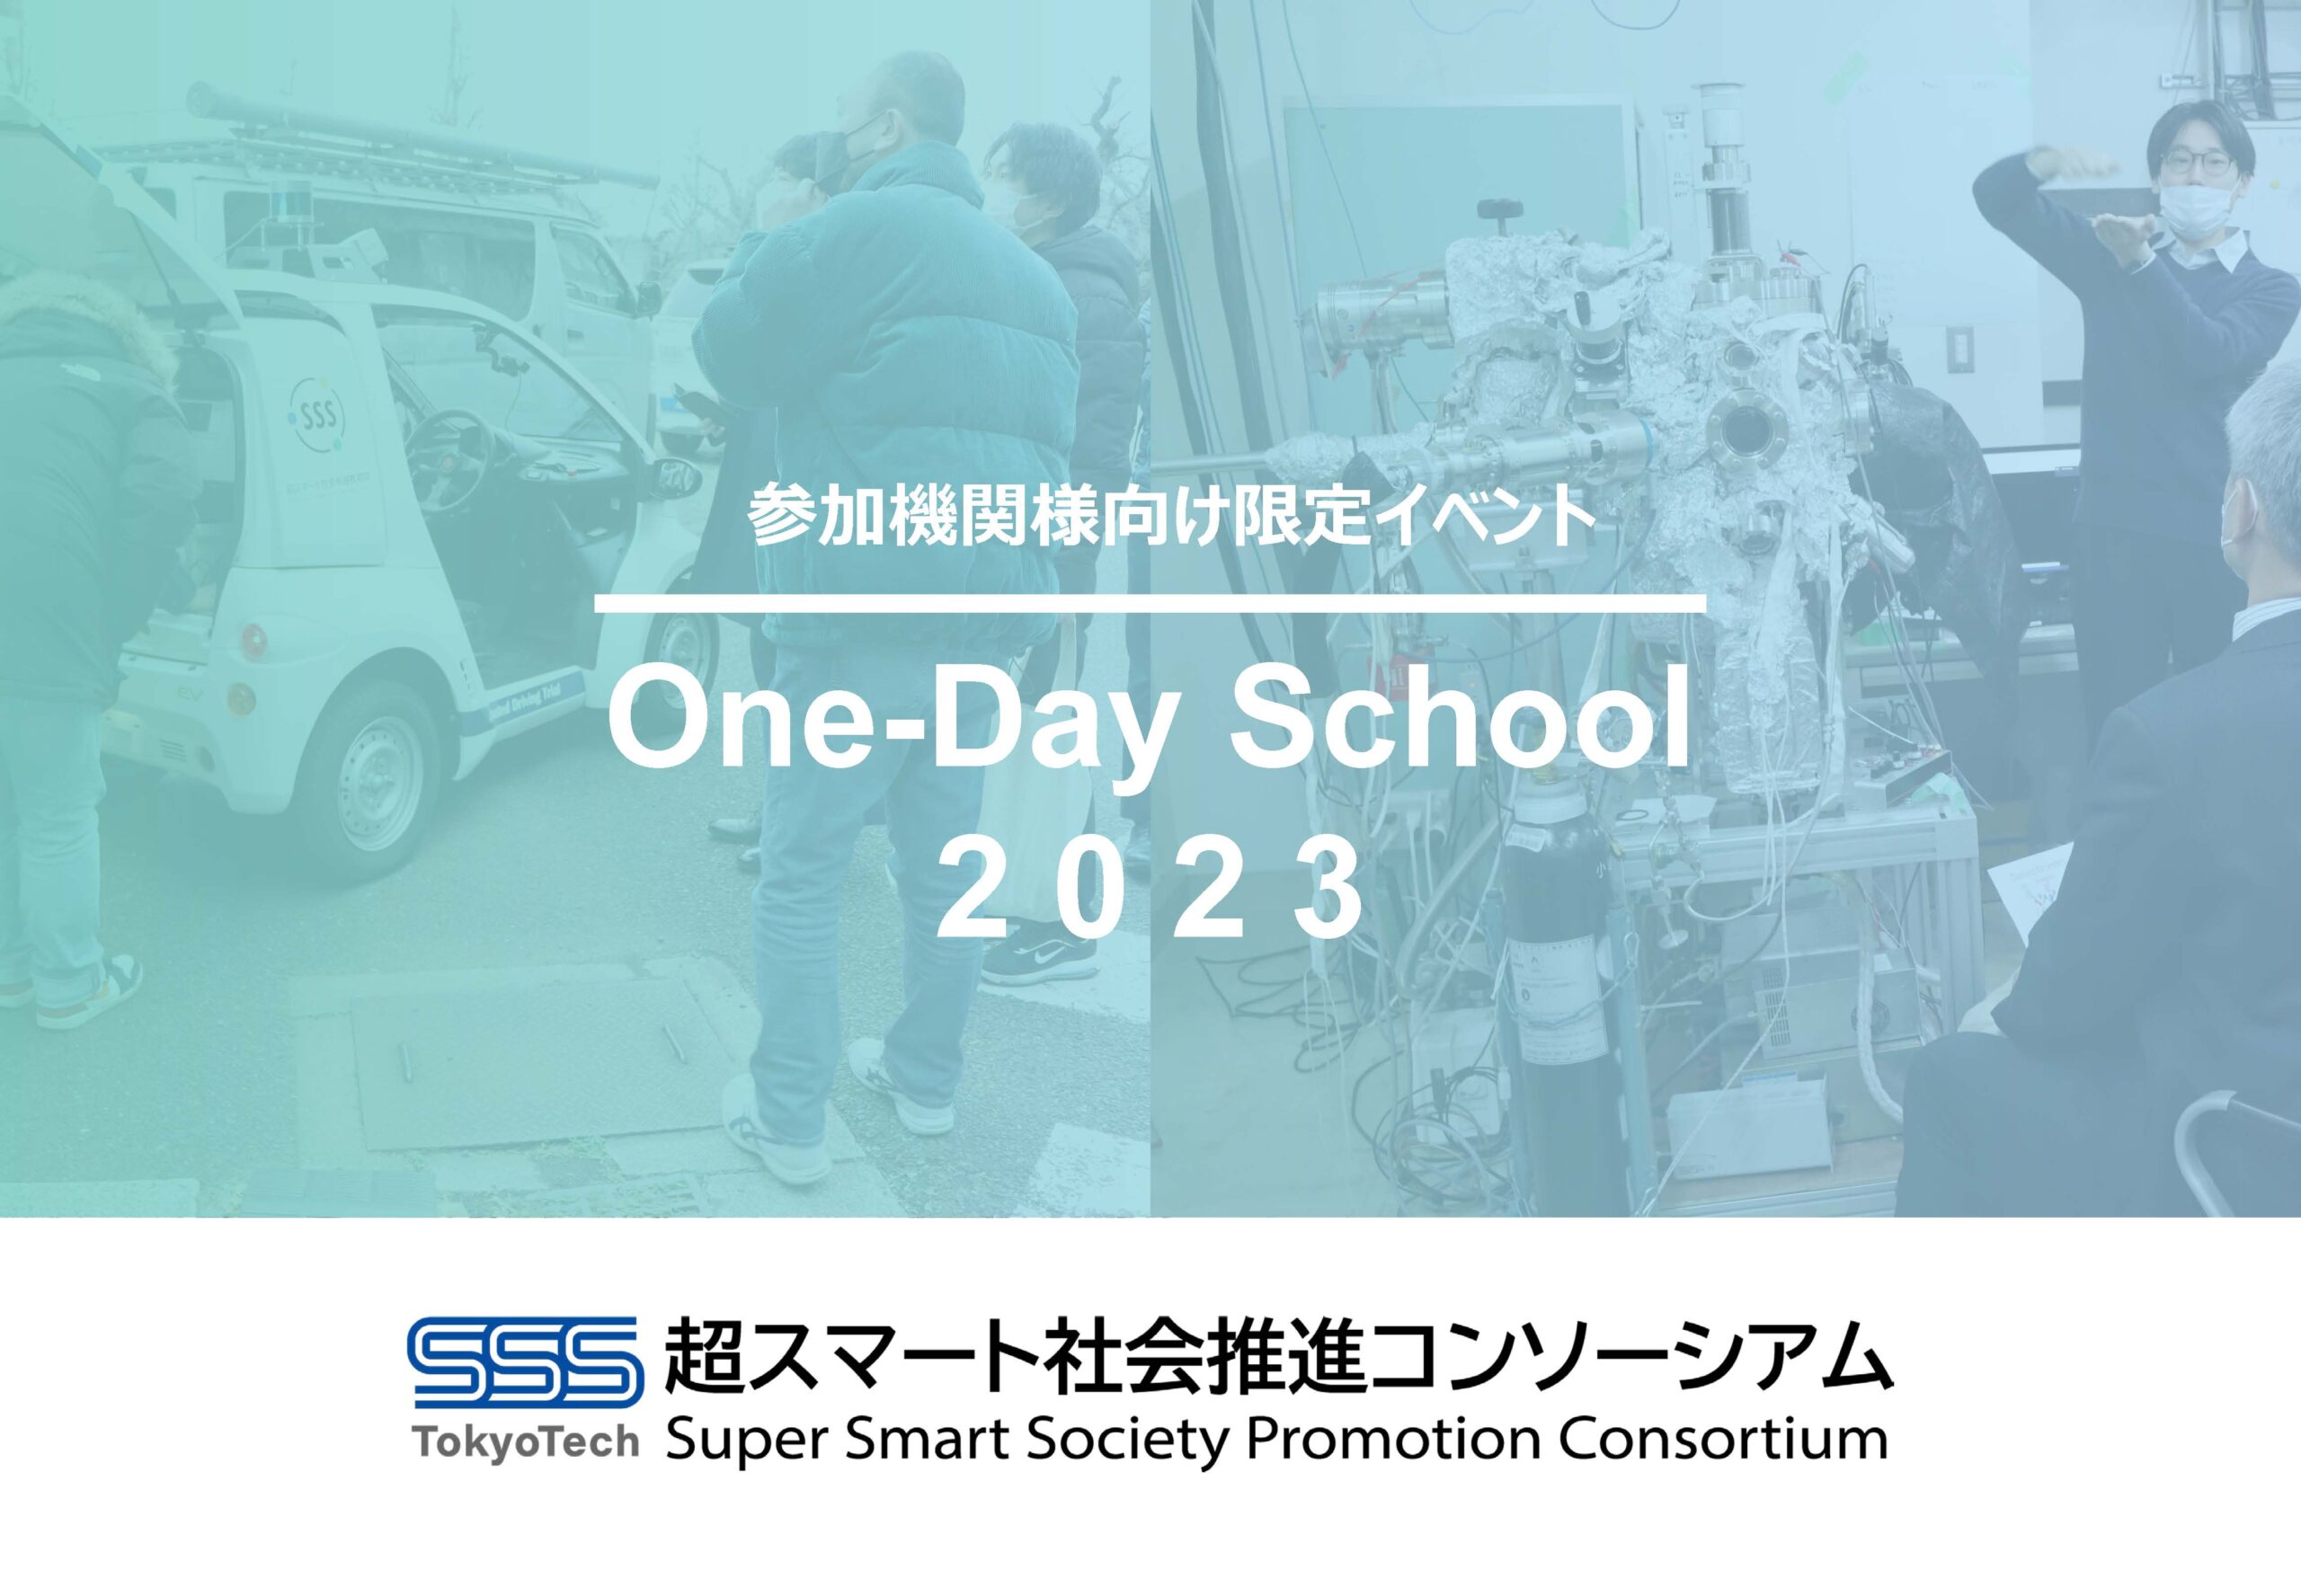 [Limited Event] One-day School 2023